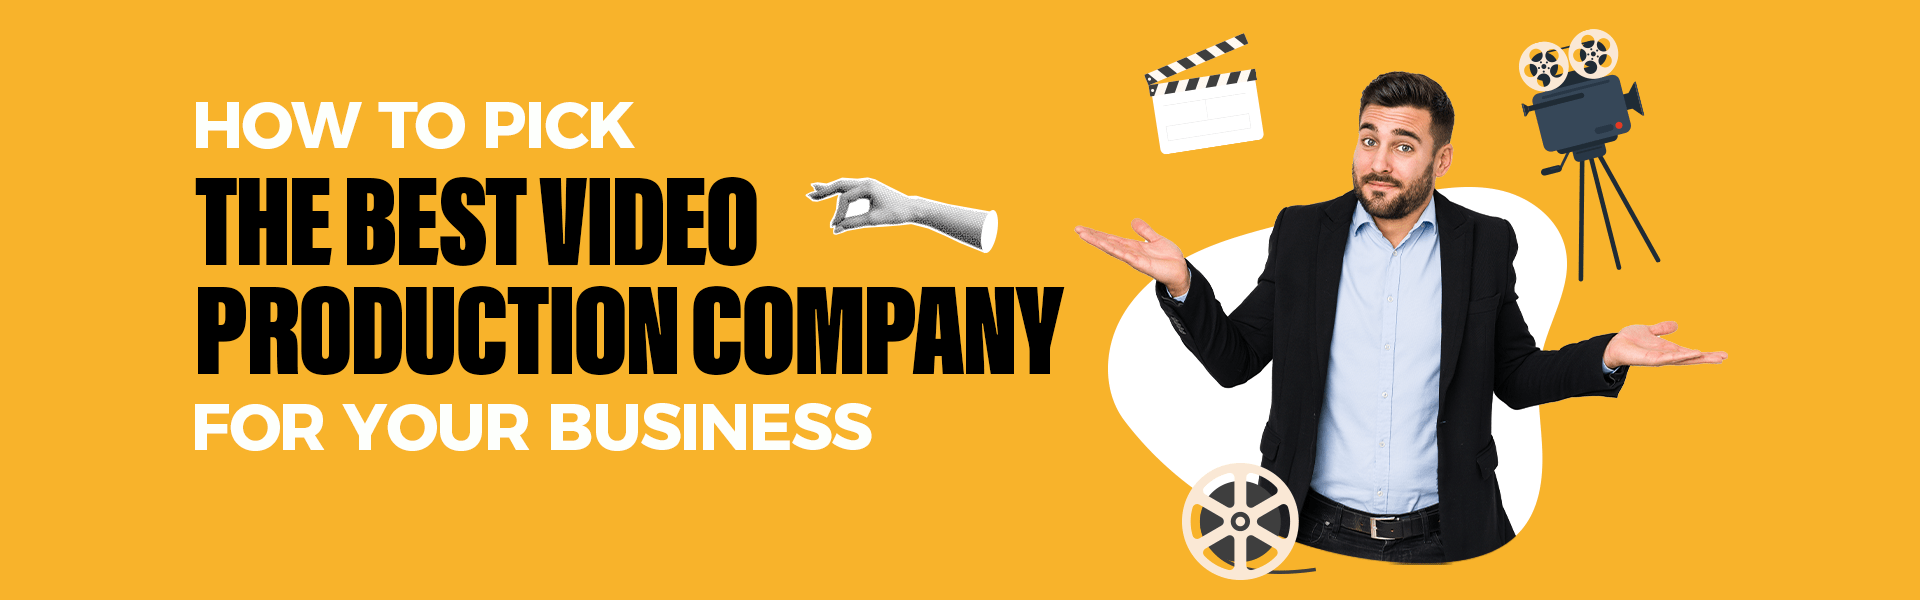 how to pick the best video production company for your business